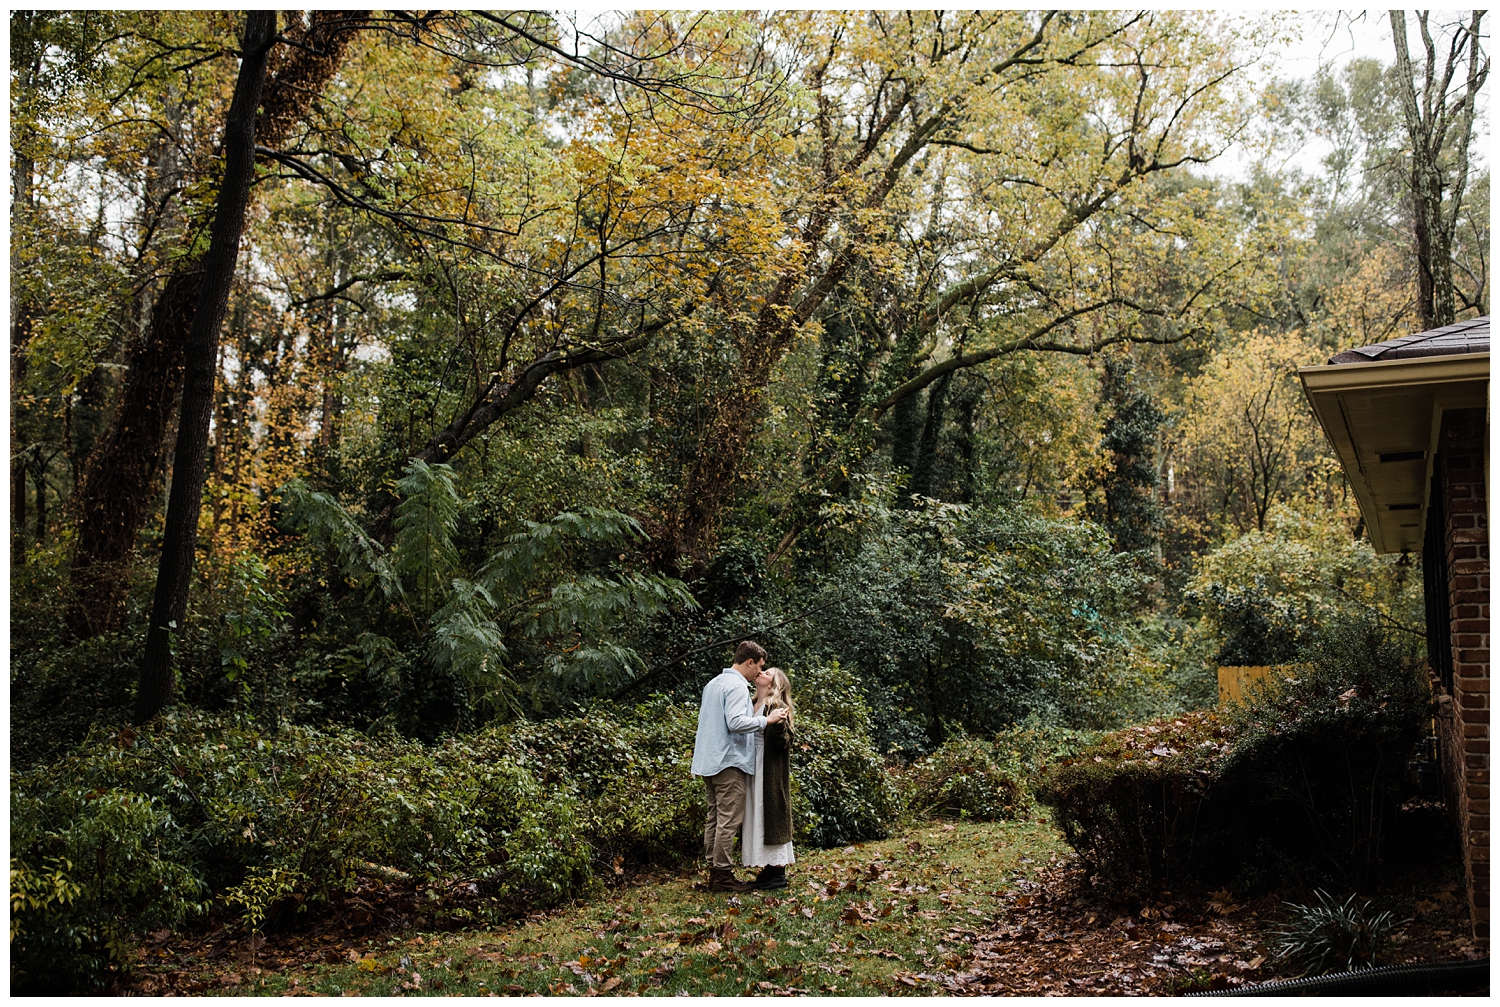 Rainy Day Engagement Session in Marietta, Georgia with cute couple dancing in the rain